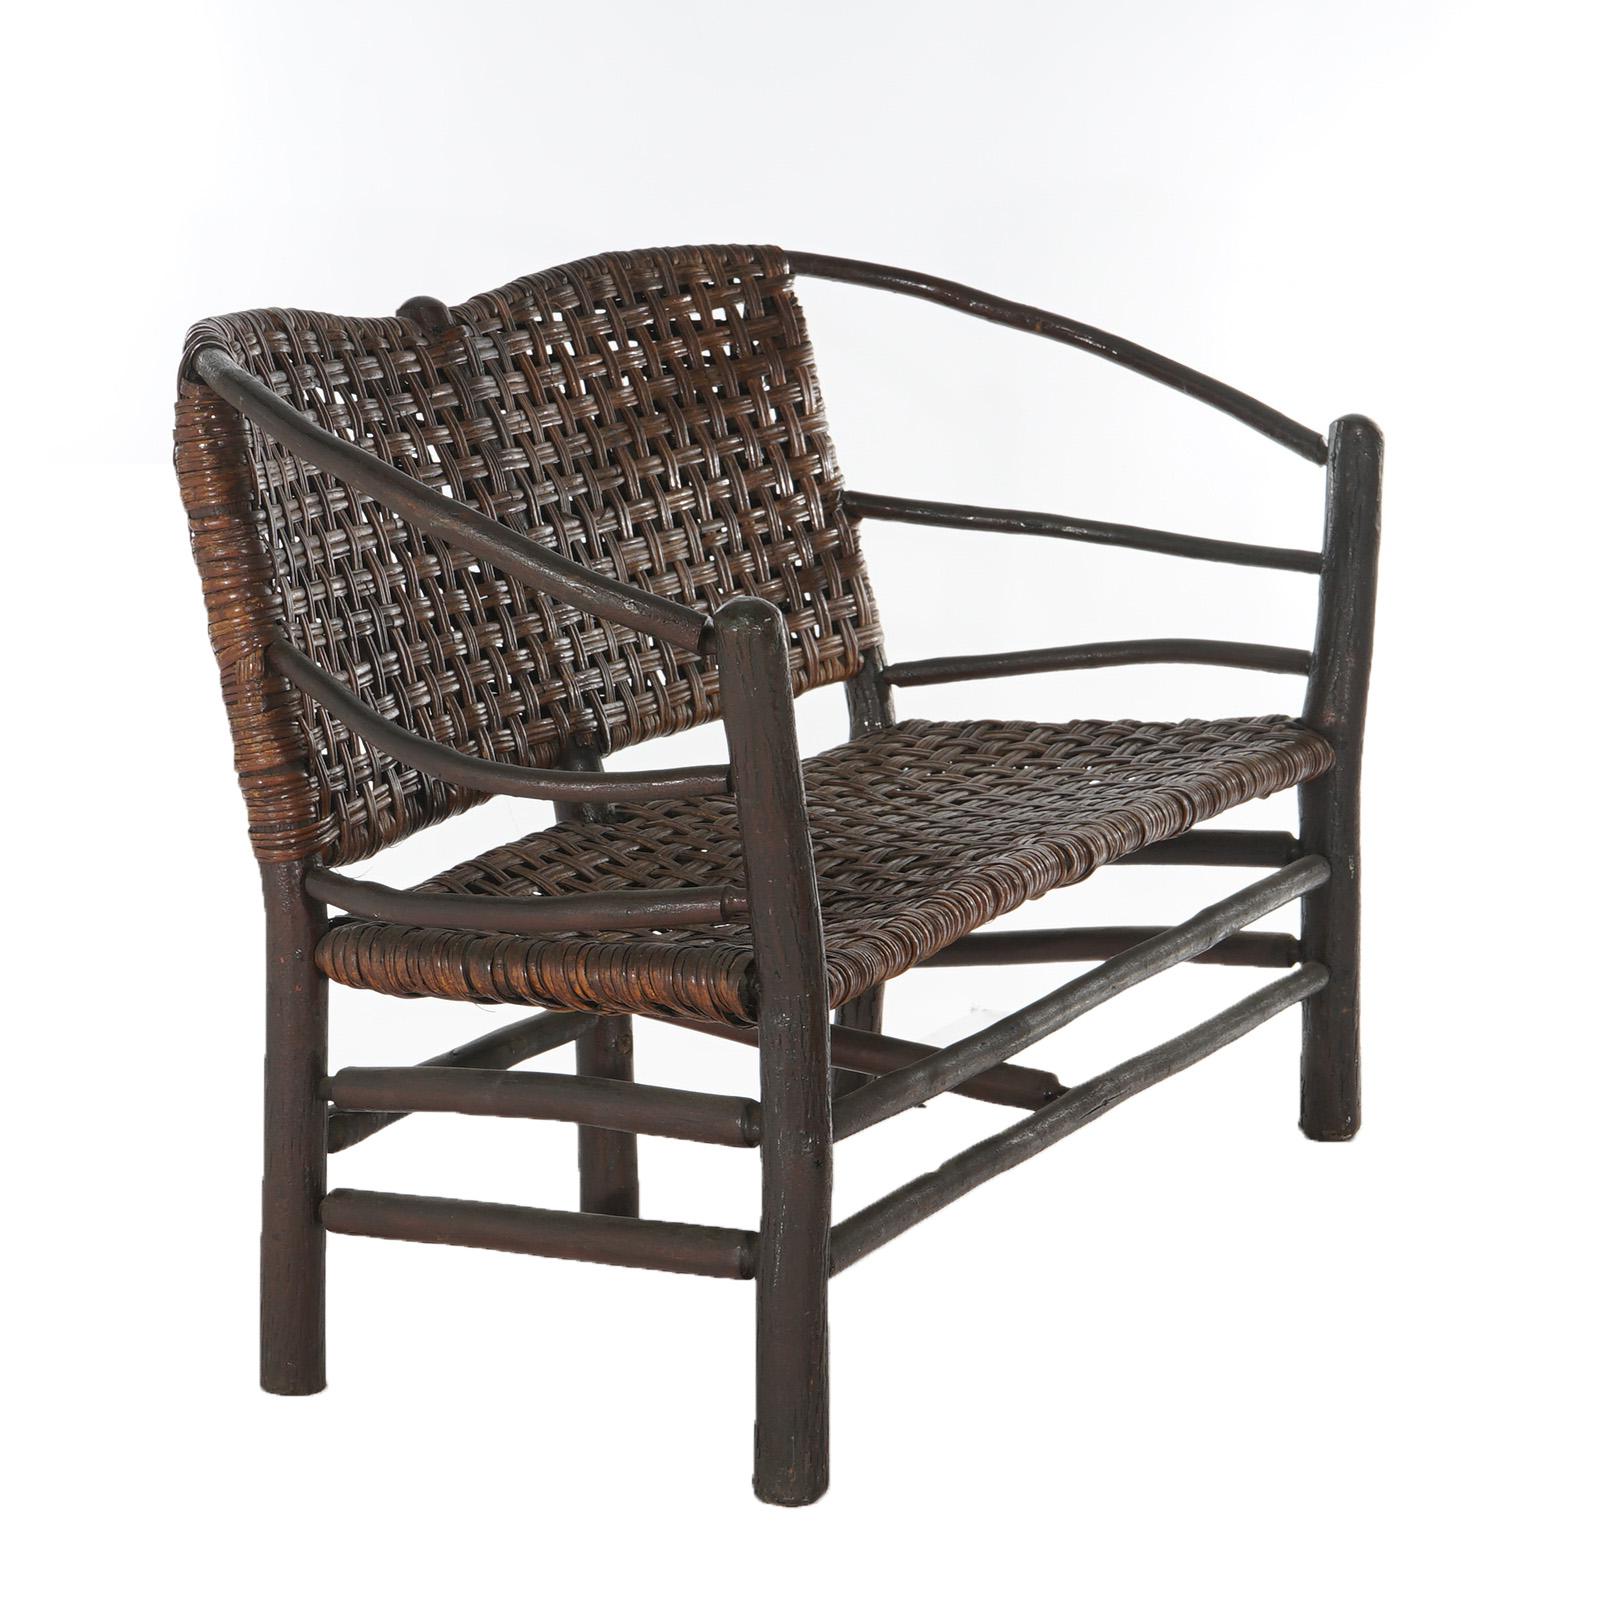 Antique Adirondack Old Hickory Stick Form & Splint Settee C1920 In Good Condition For Sale In Big Flats, NY